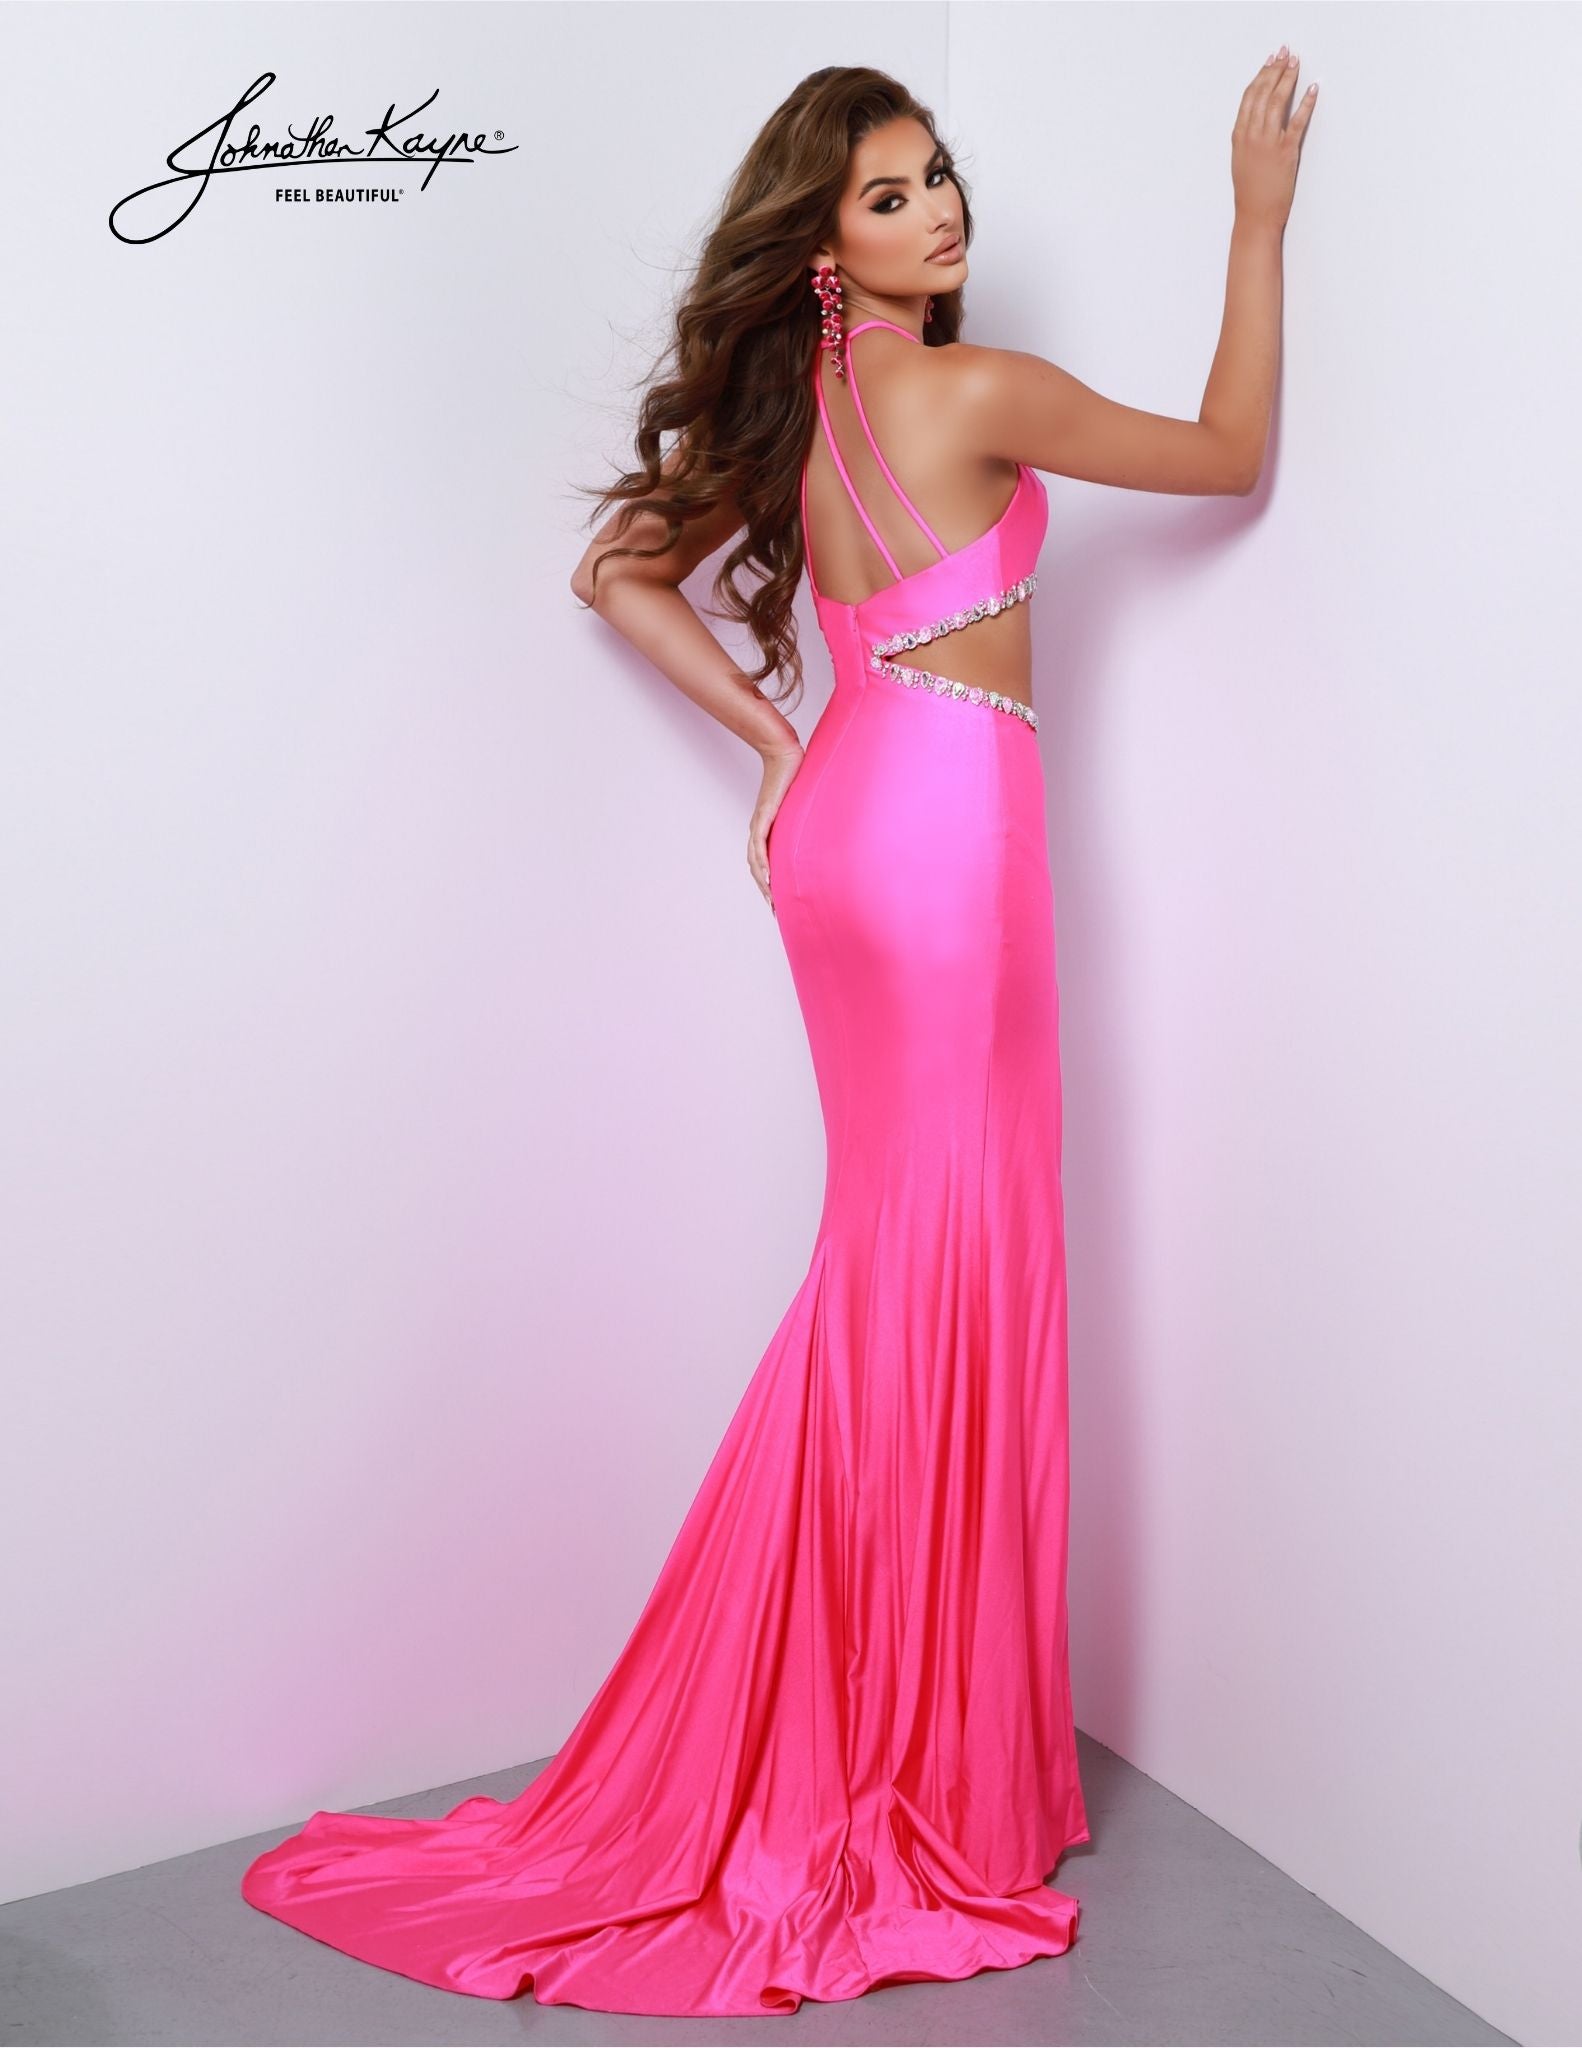 Johnathan Kayne 2855 is an elegant and sophisticated prom dress, perfect for any pageant. Boasting a scoop neck, beaded side cutouts, and sleeveless design, this gown is sure to turn heads. Its fitted silhouette and long skirt ensure a classic, timeless look. Get ready to sizzle! This 4 Way Stretch Lycra gown adorned with a beaded side cutout and thigh-high slit is all about being flirty and fabulous. With the perfect blend of comfort & stunning embellishments, you will turn heads and steal the spotlight.